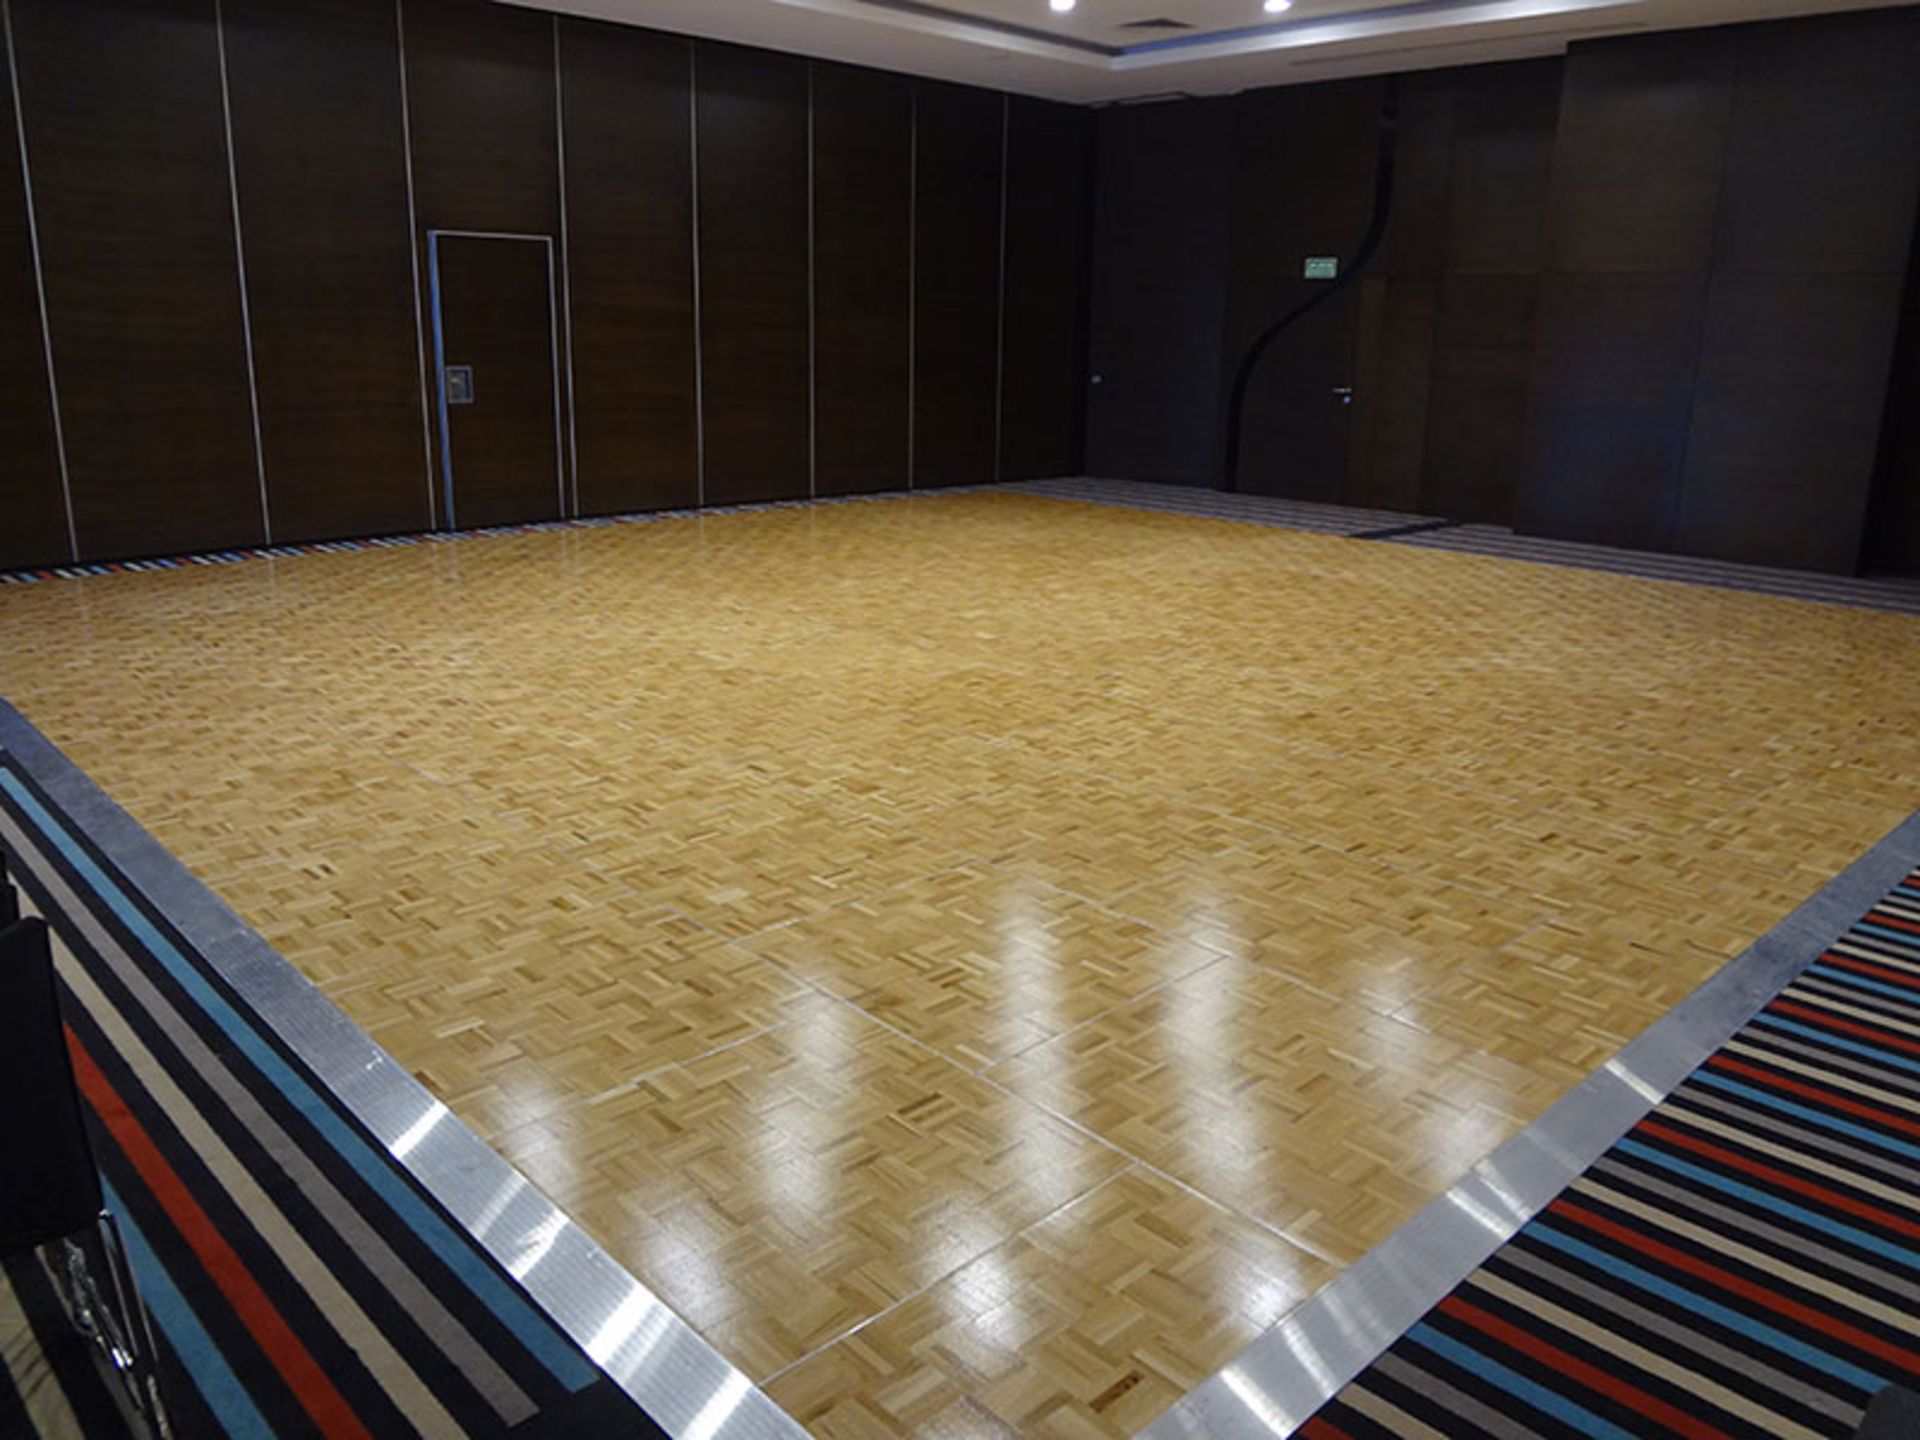 *Portable Floor Maker 15x15ft Aluminium Backed Clip Together Parquet Dance Floor (refinished)